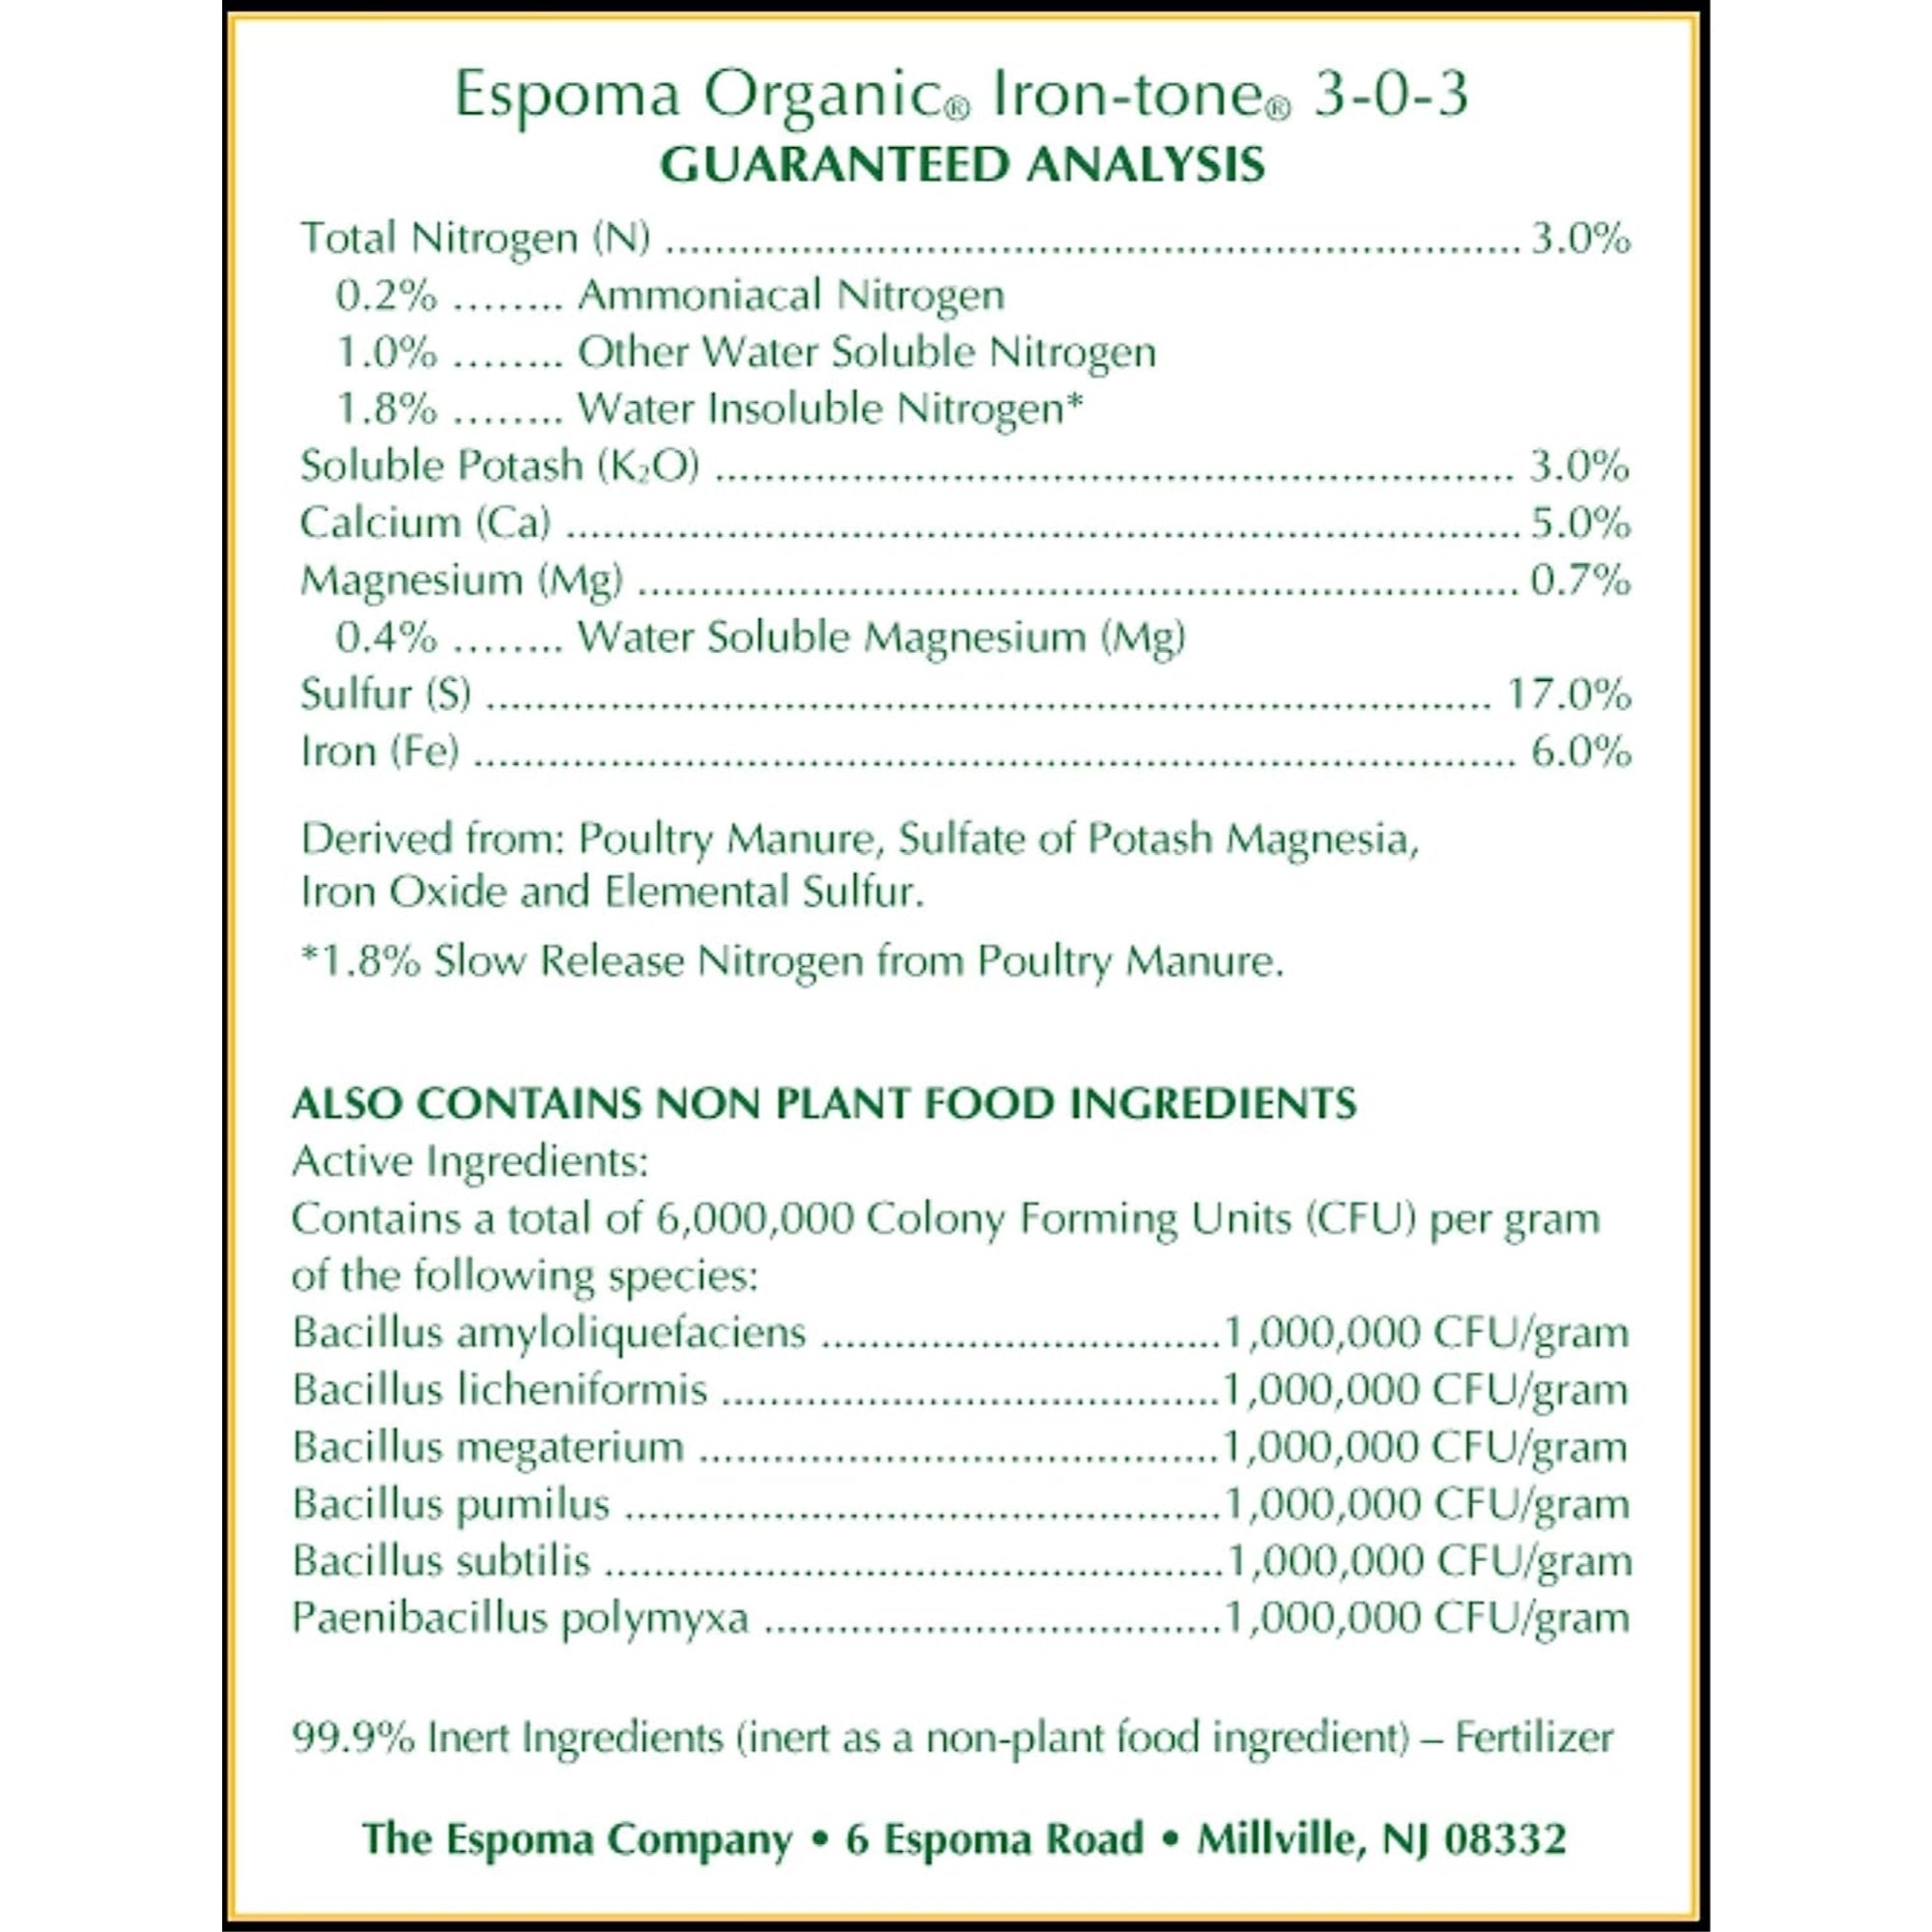 Espoma Organic Iron-tone 3-0-3 Plant Food for Organic Gardening, Lowers Soil pH - Turns Yellow to Green for a Greener Lawn and Garden